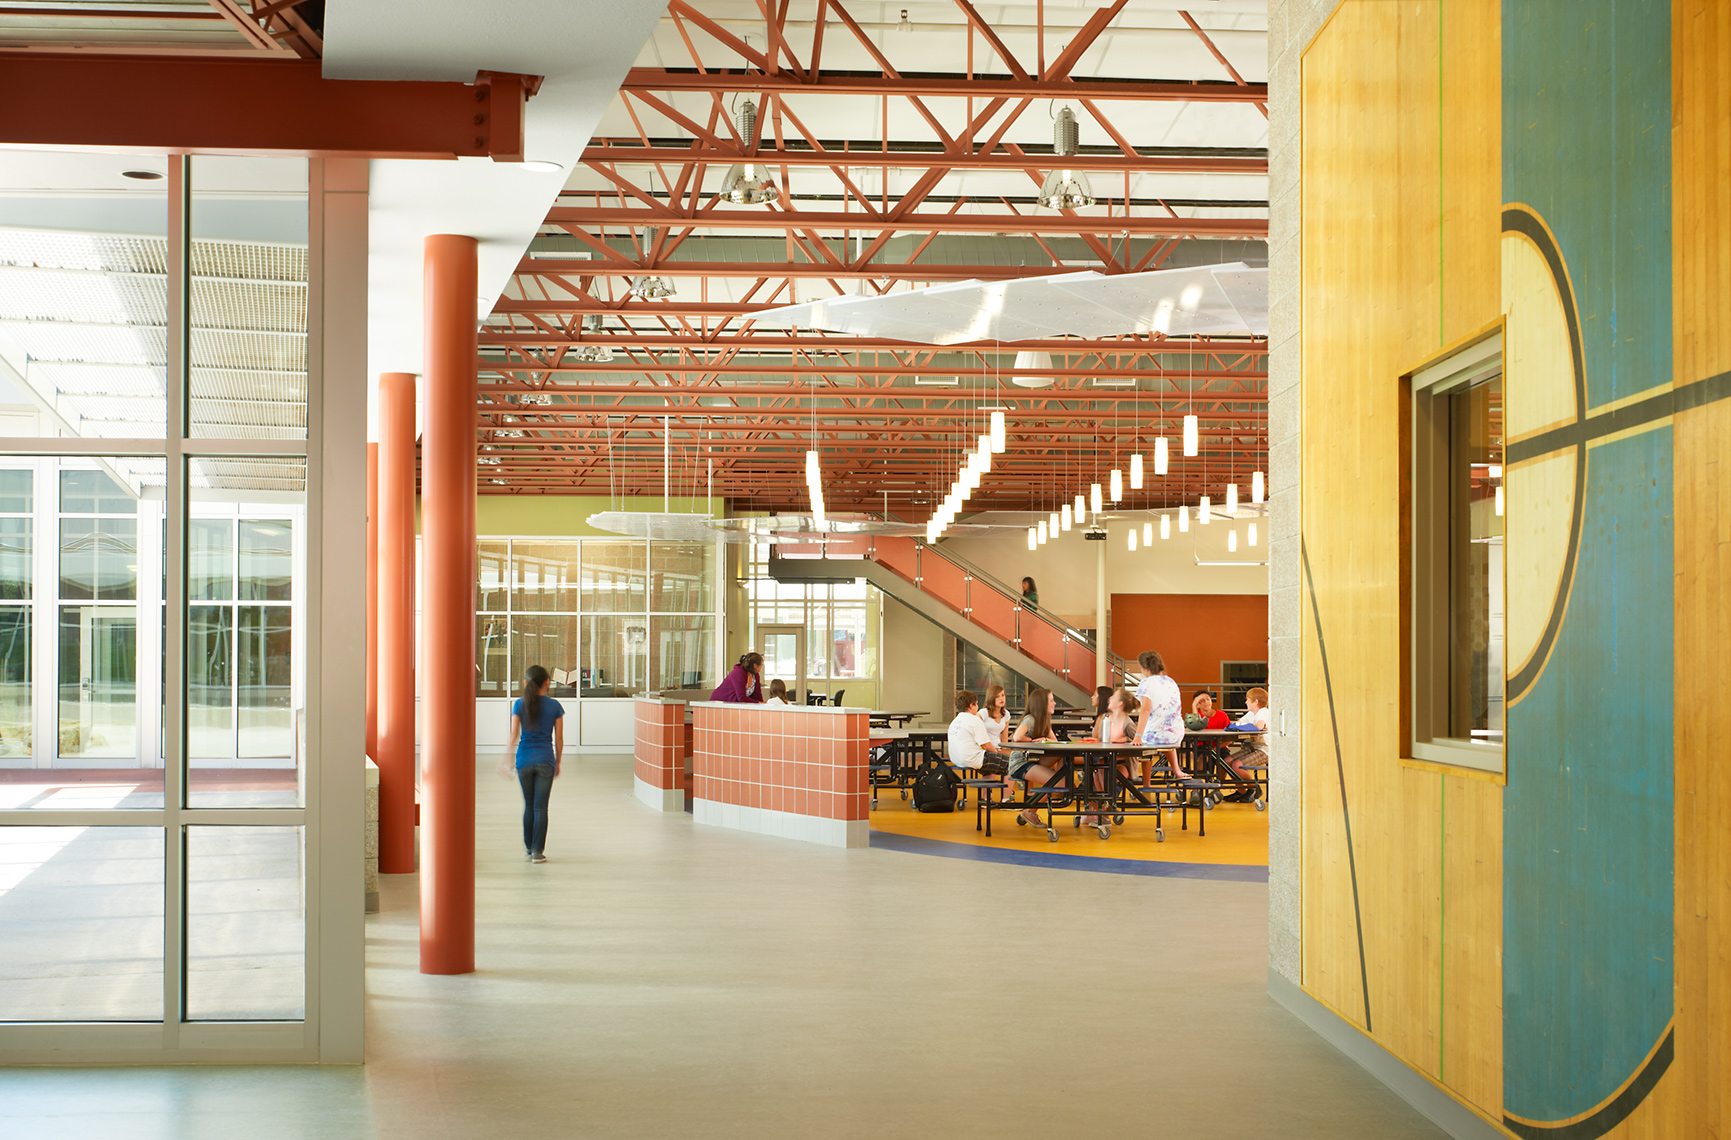 David Patterson Photography/Photography of Architecture+ Interiors, Boulder,Colorado, K-12, Higher Education